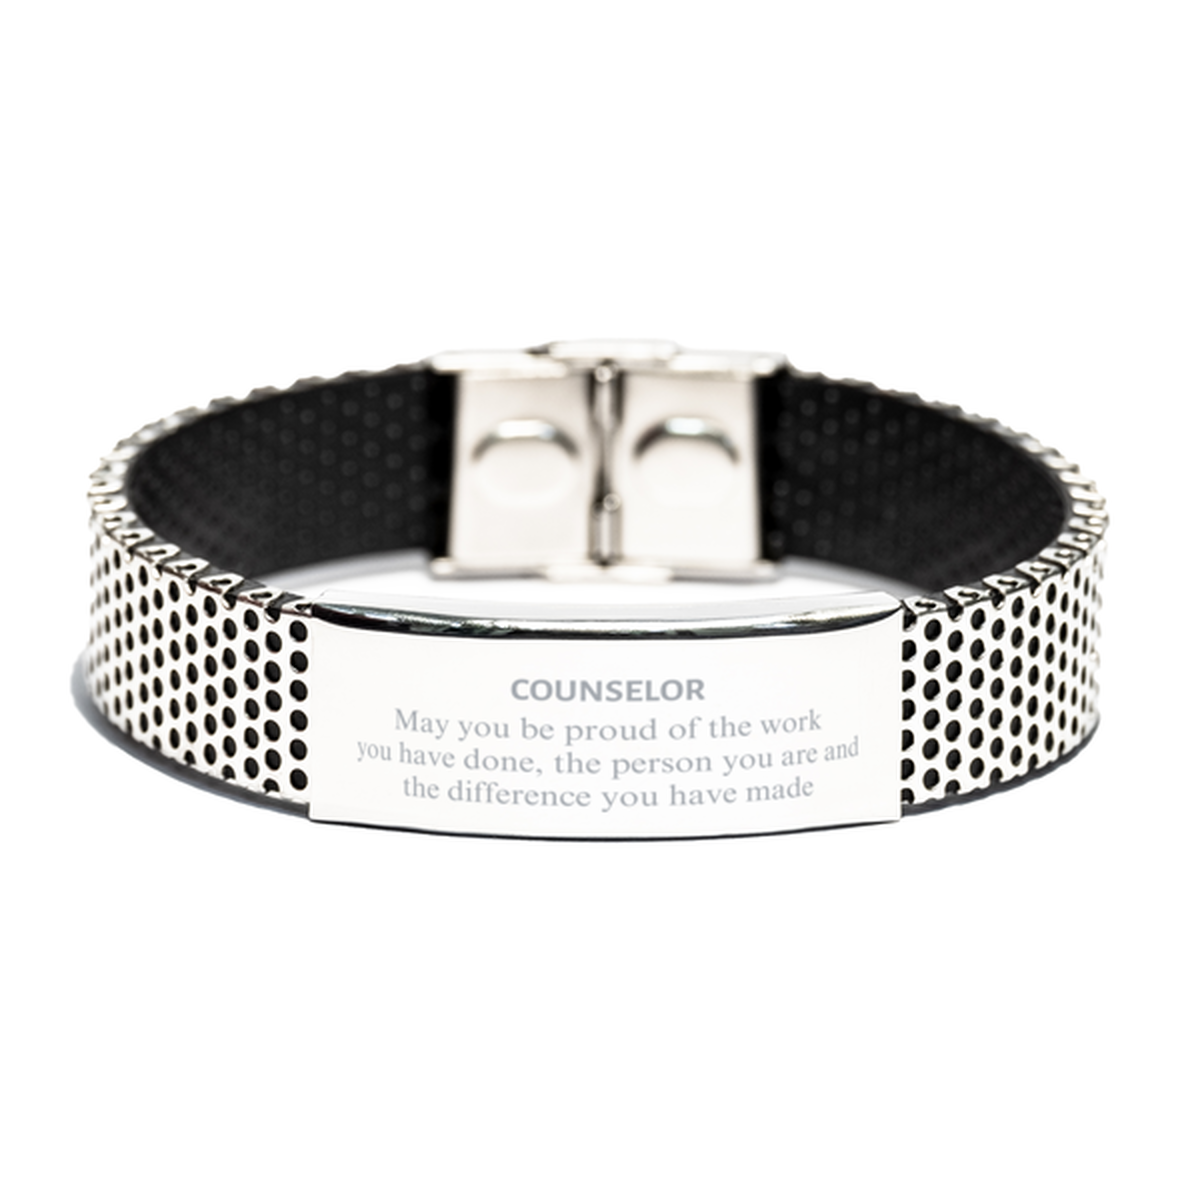 Counselor May you be proud of the work you have done, Retirement Counselor Stainless Steel Bracelet for Colleague Appreciation Gifts Amazing for Counselor